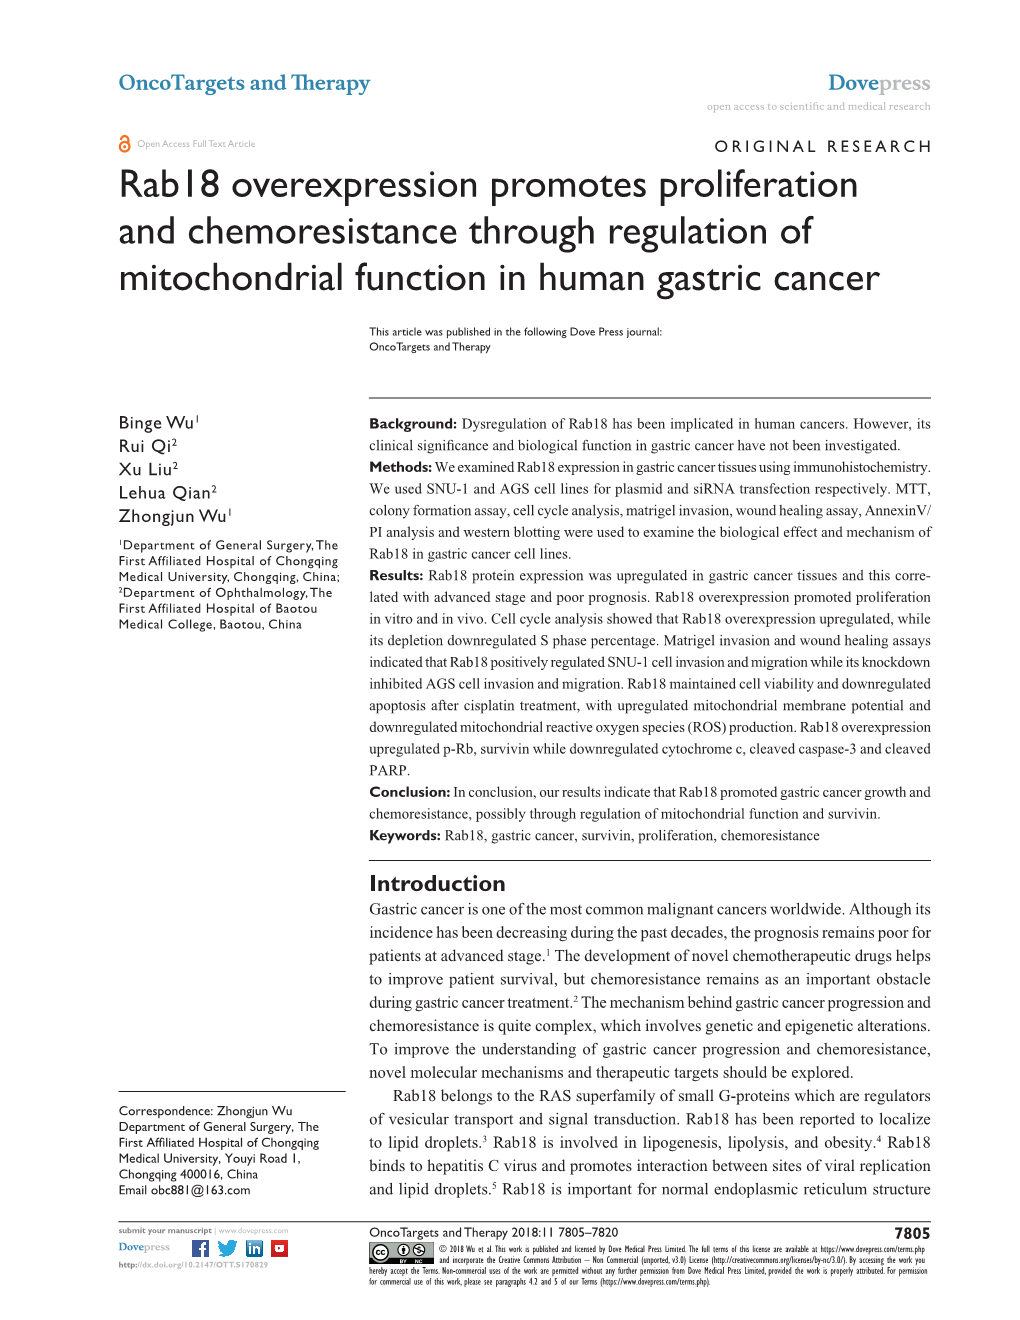 Rab18 Overexpression Promotes Proliferation and Chemoresistance Through Regulation of Mitochondrial Function in Human Gastric Cancer